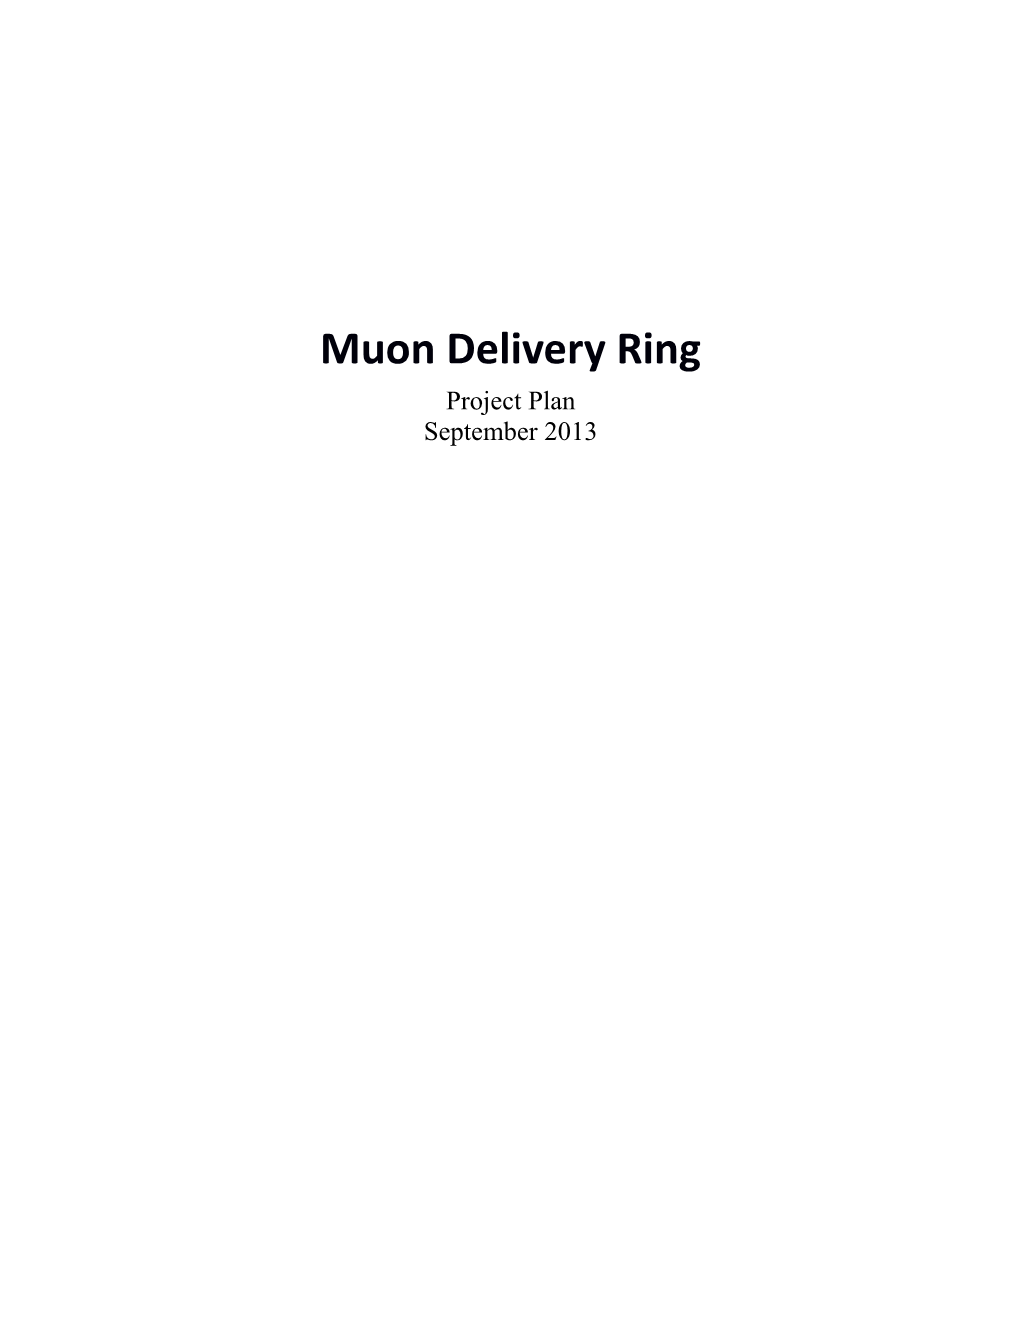 Muon Delivery Ring